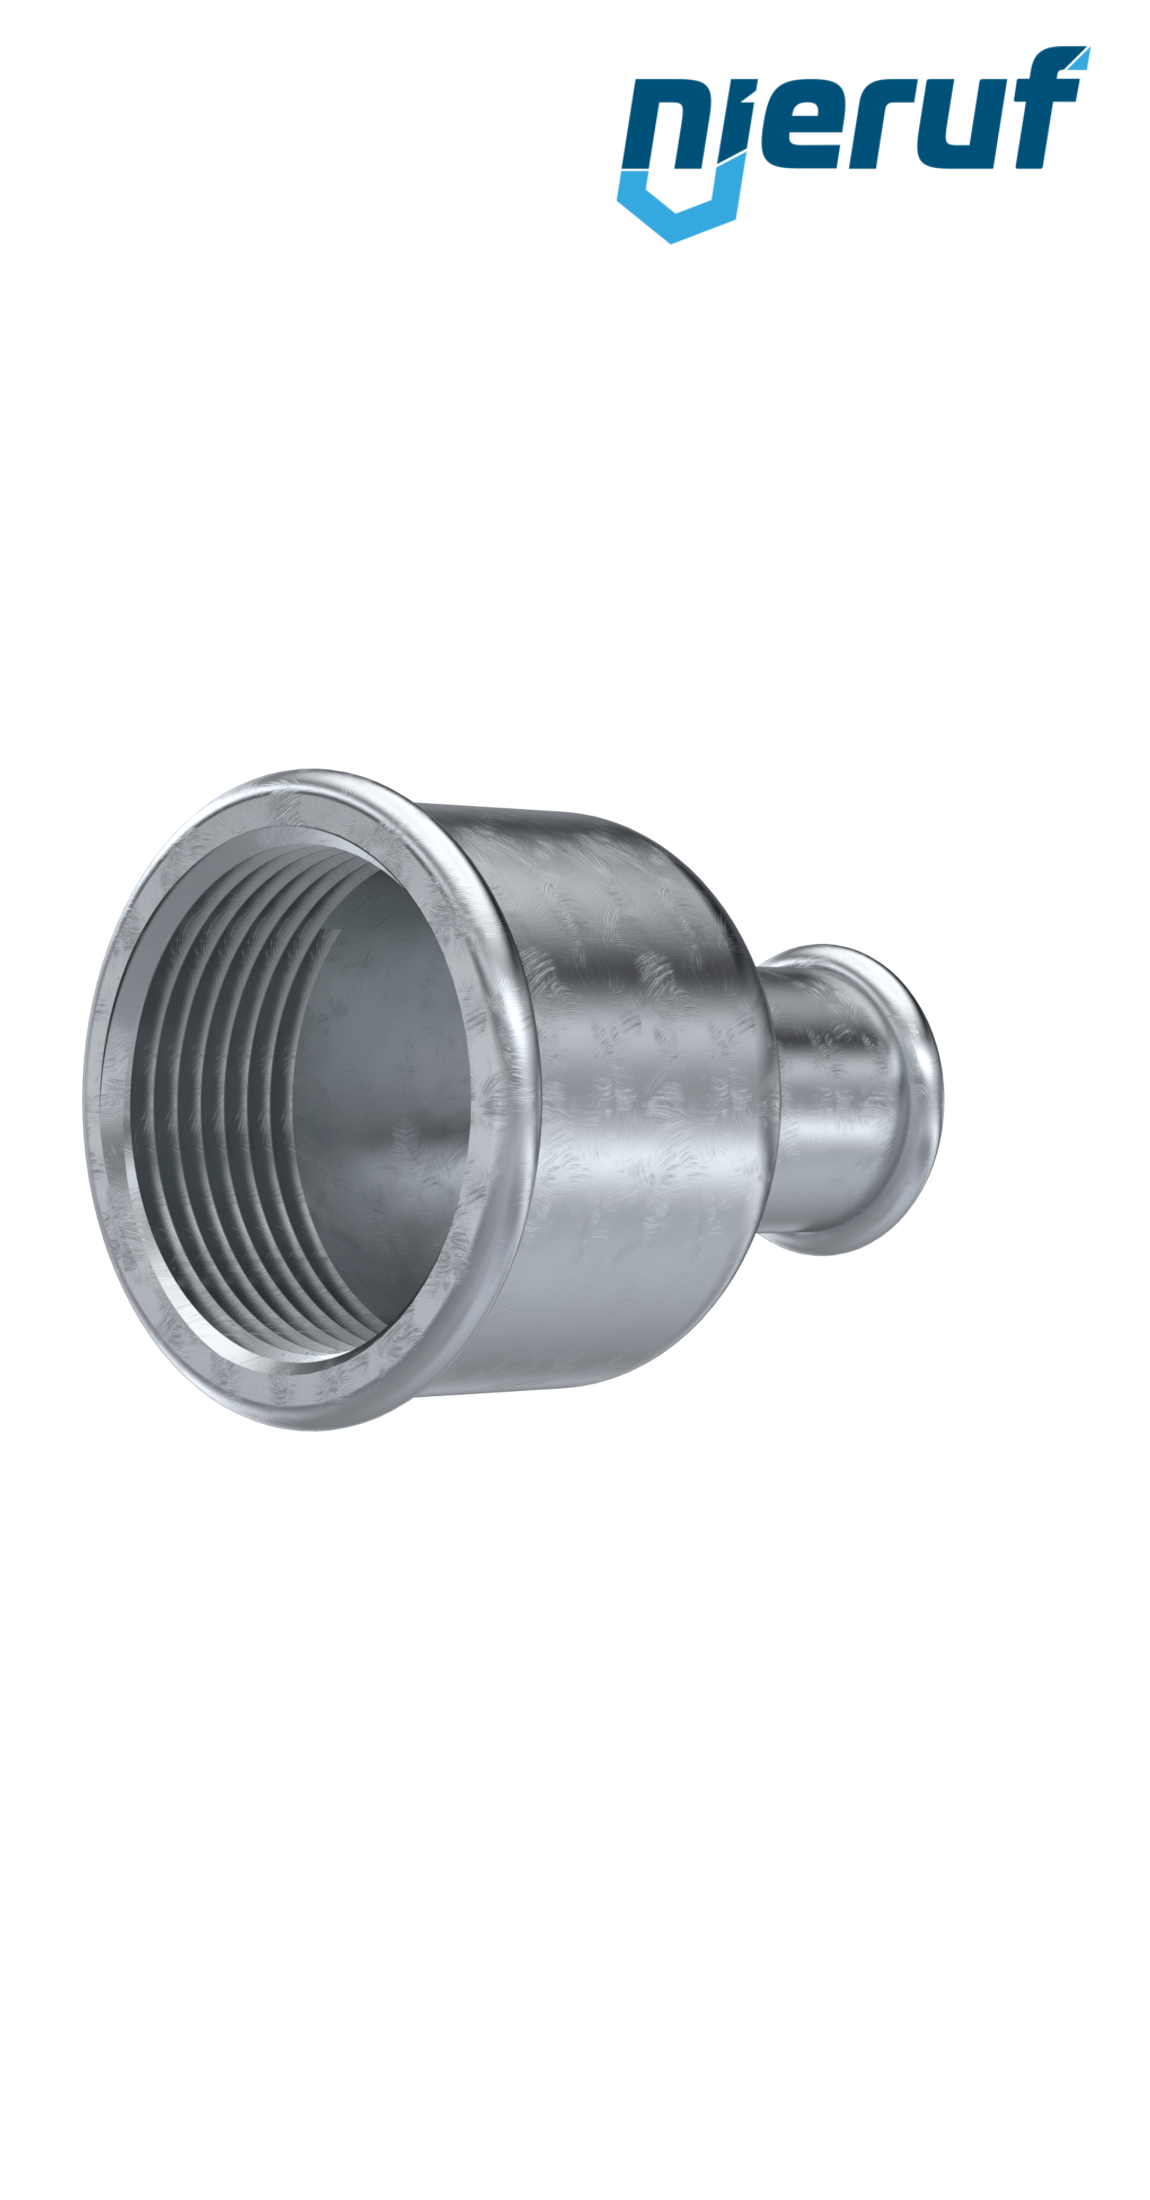 Malleable cast iron fitting reducing socket no. 240, 1 1/2" x 1/2" inch galvanized